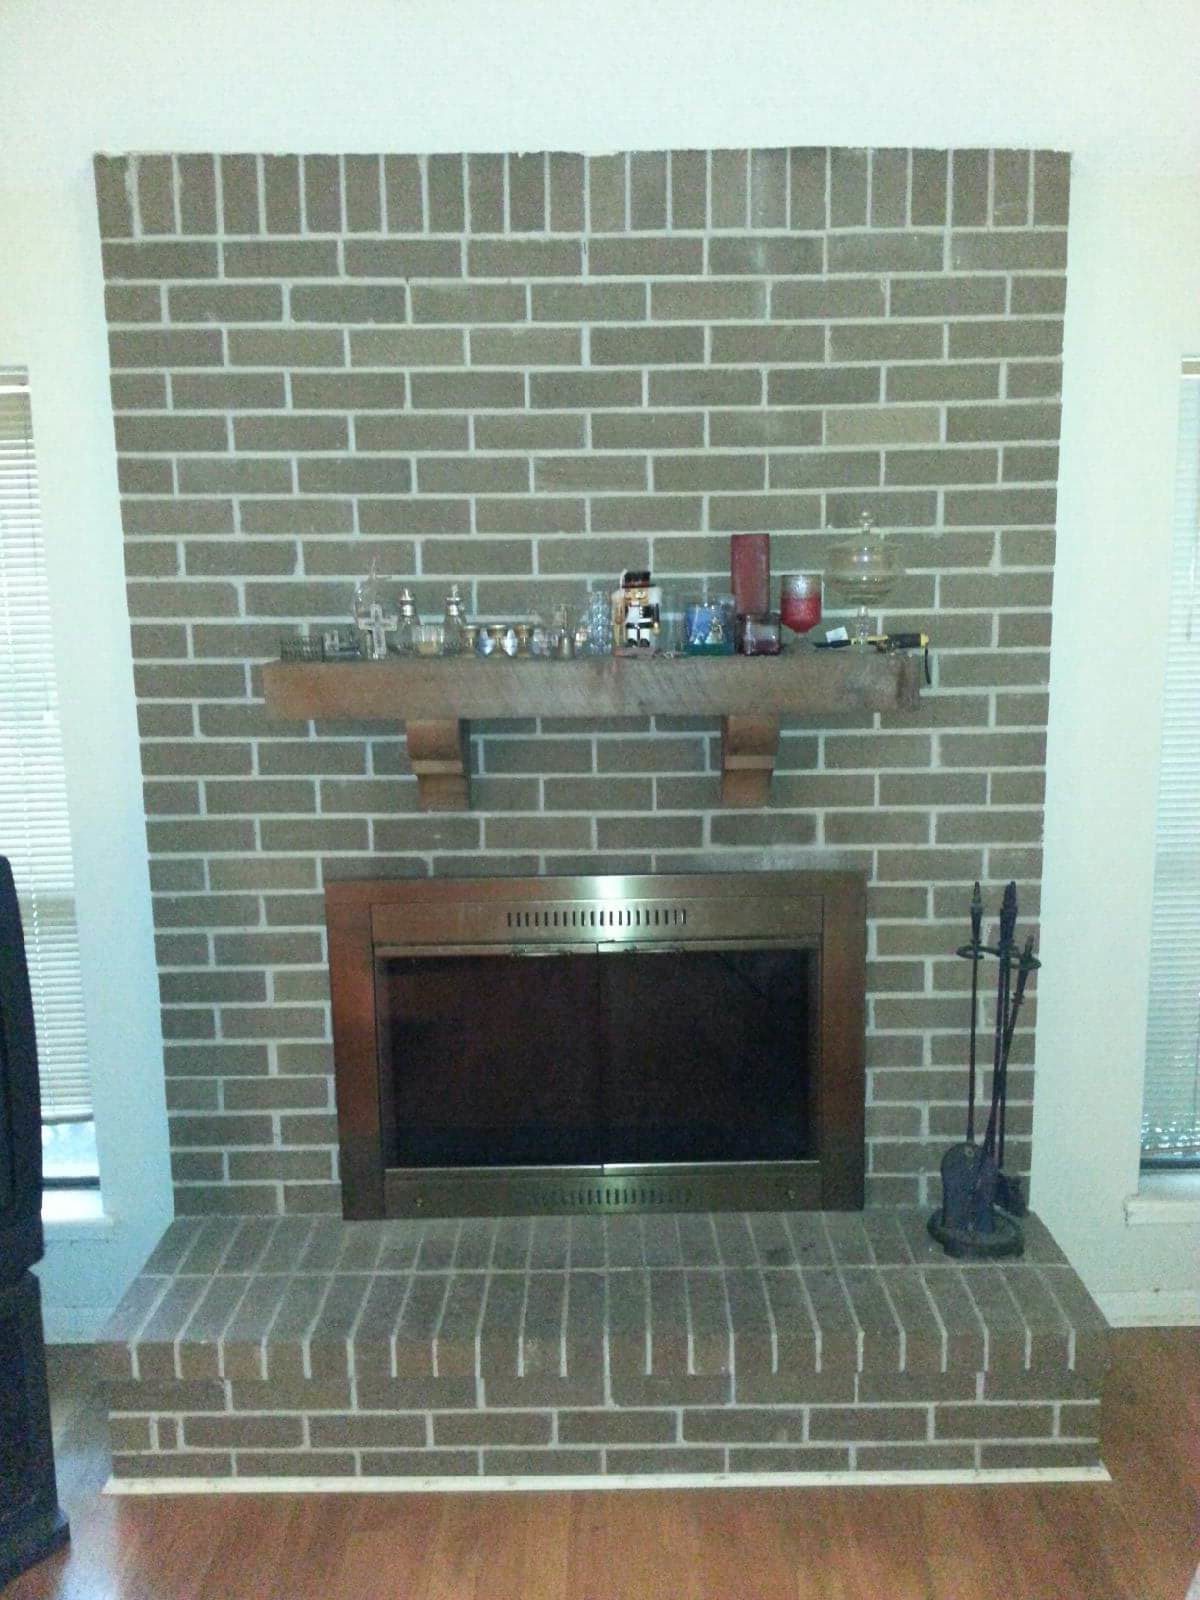 Large brick fireplace with large thick wood mantle decorated - front of brass fireplace and tools to the right.